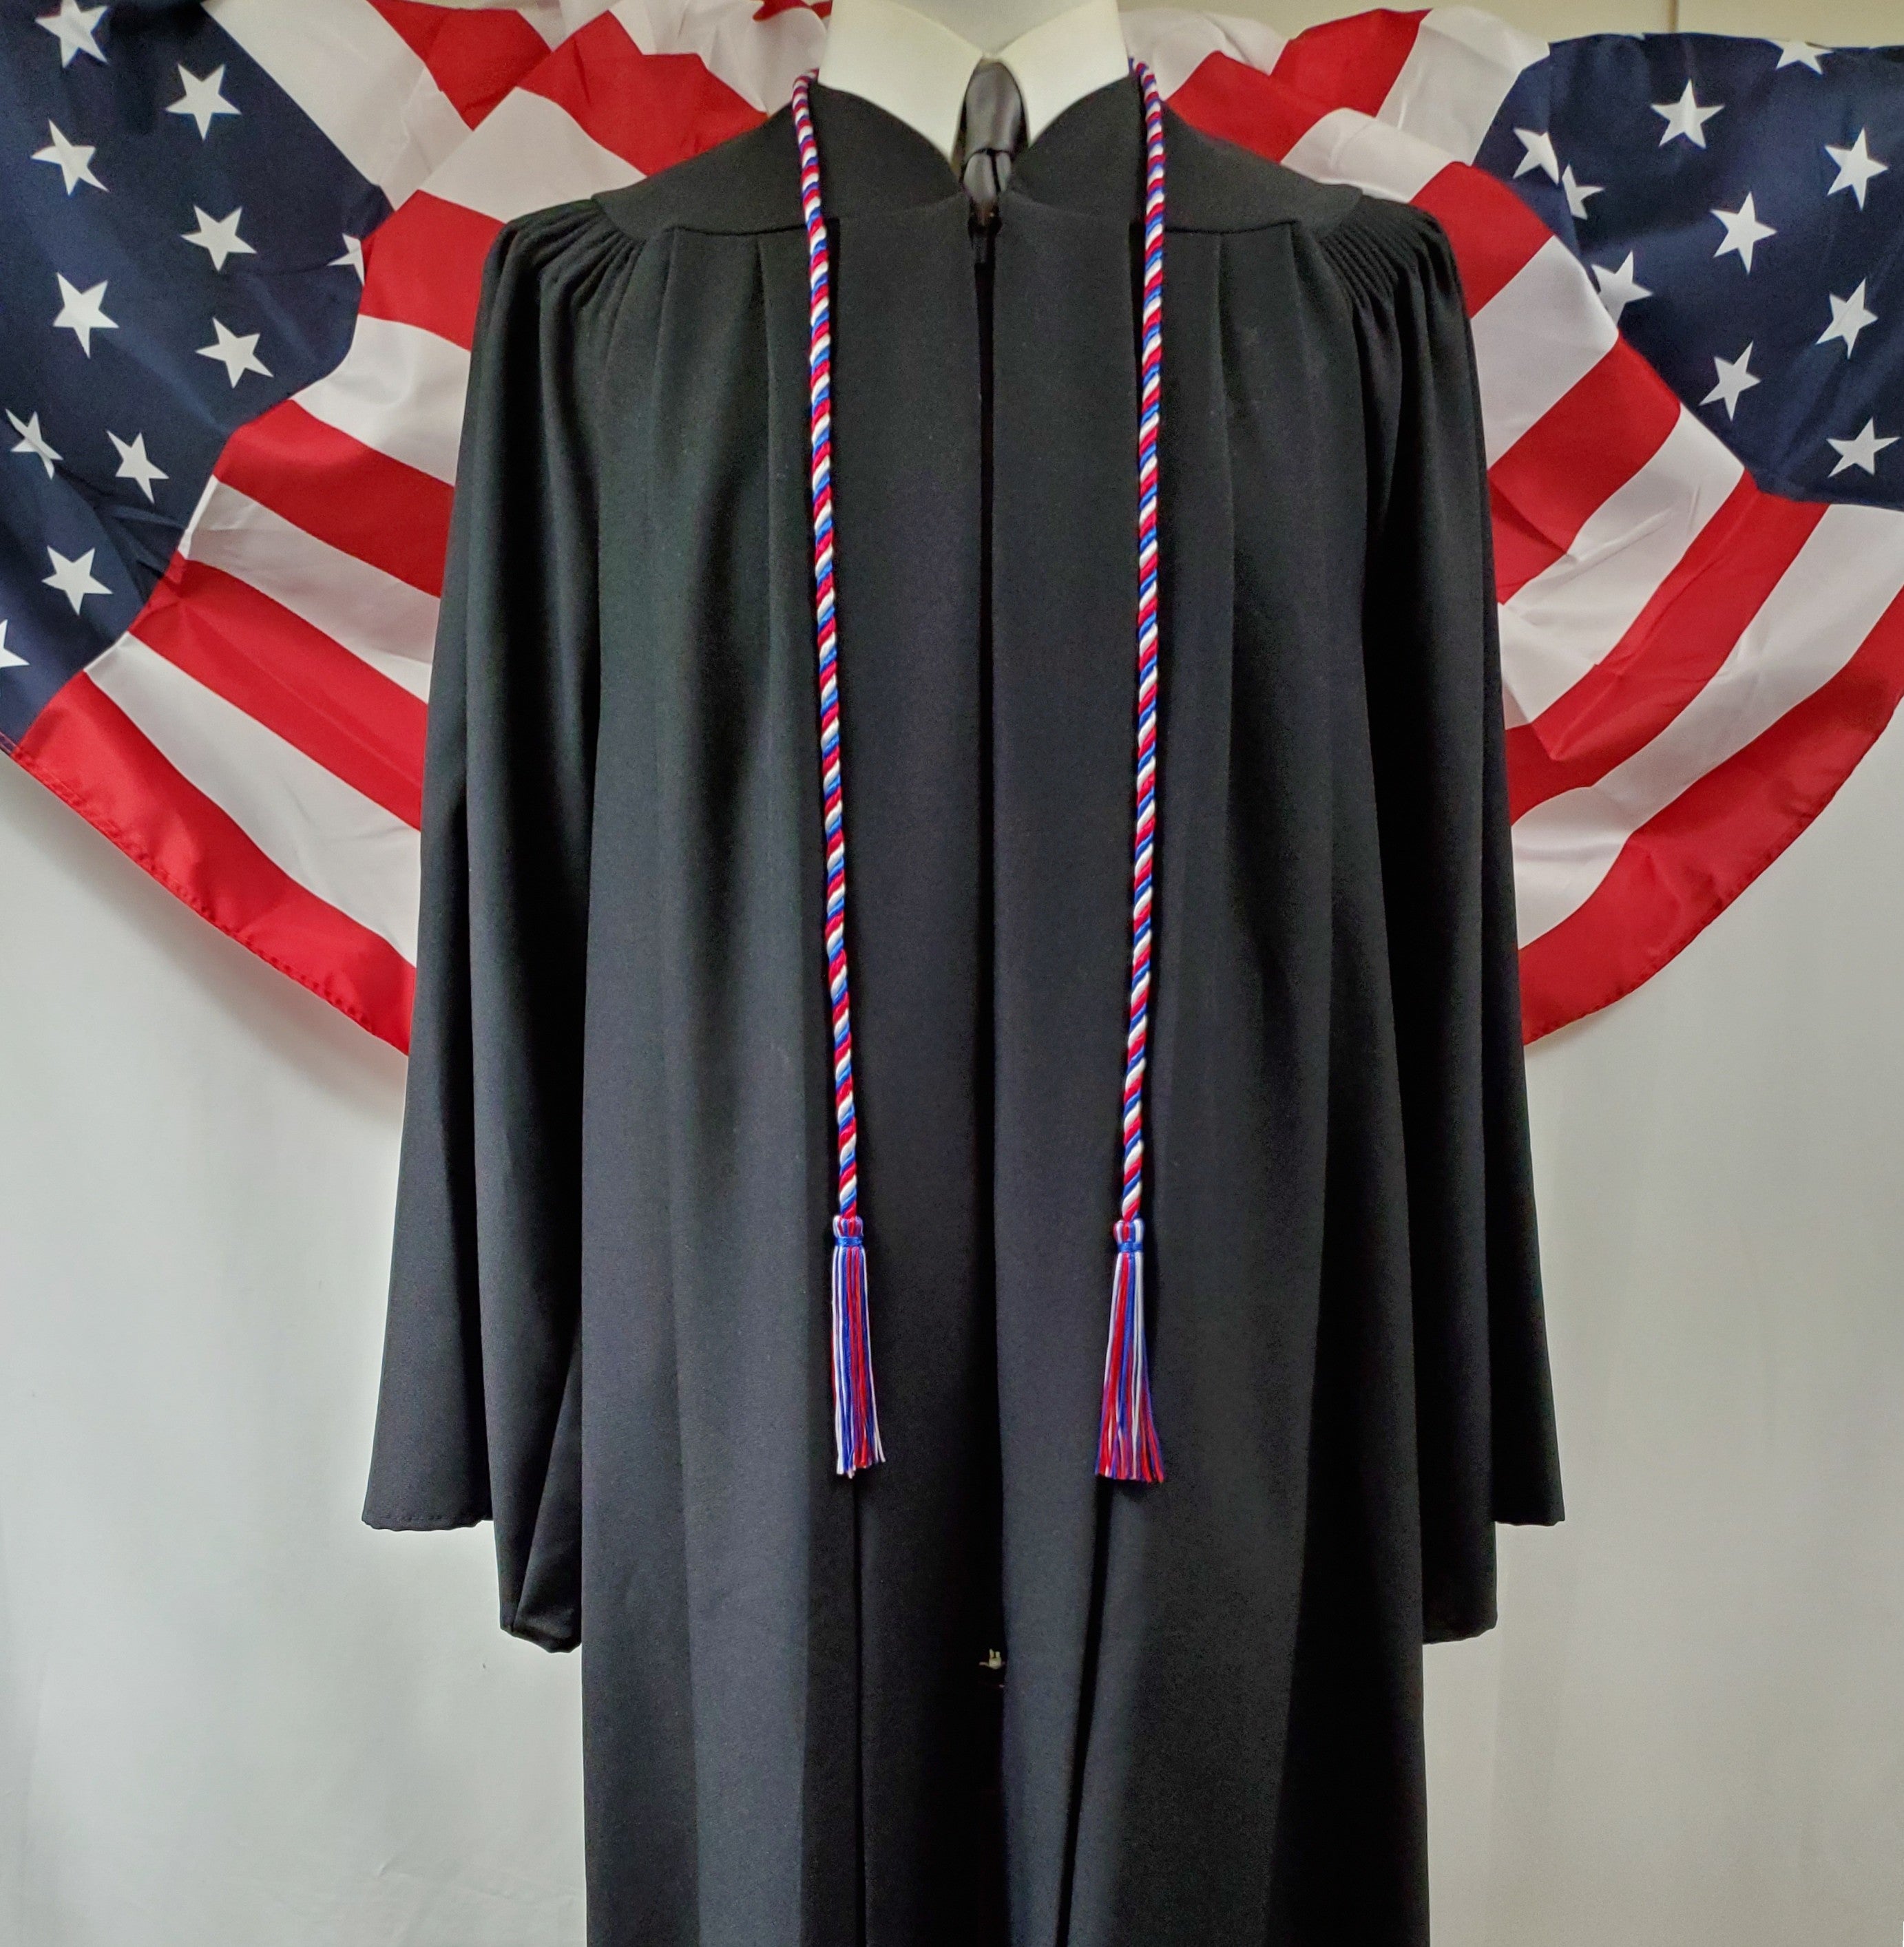 Cords For Graduation: How to Achieve Them and What They Mean to